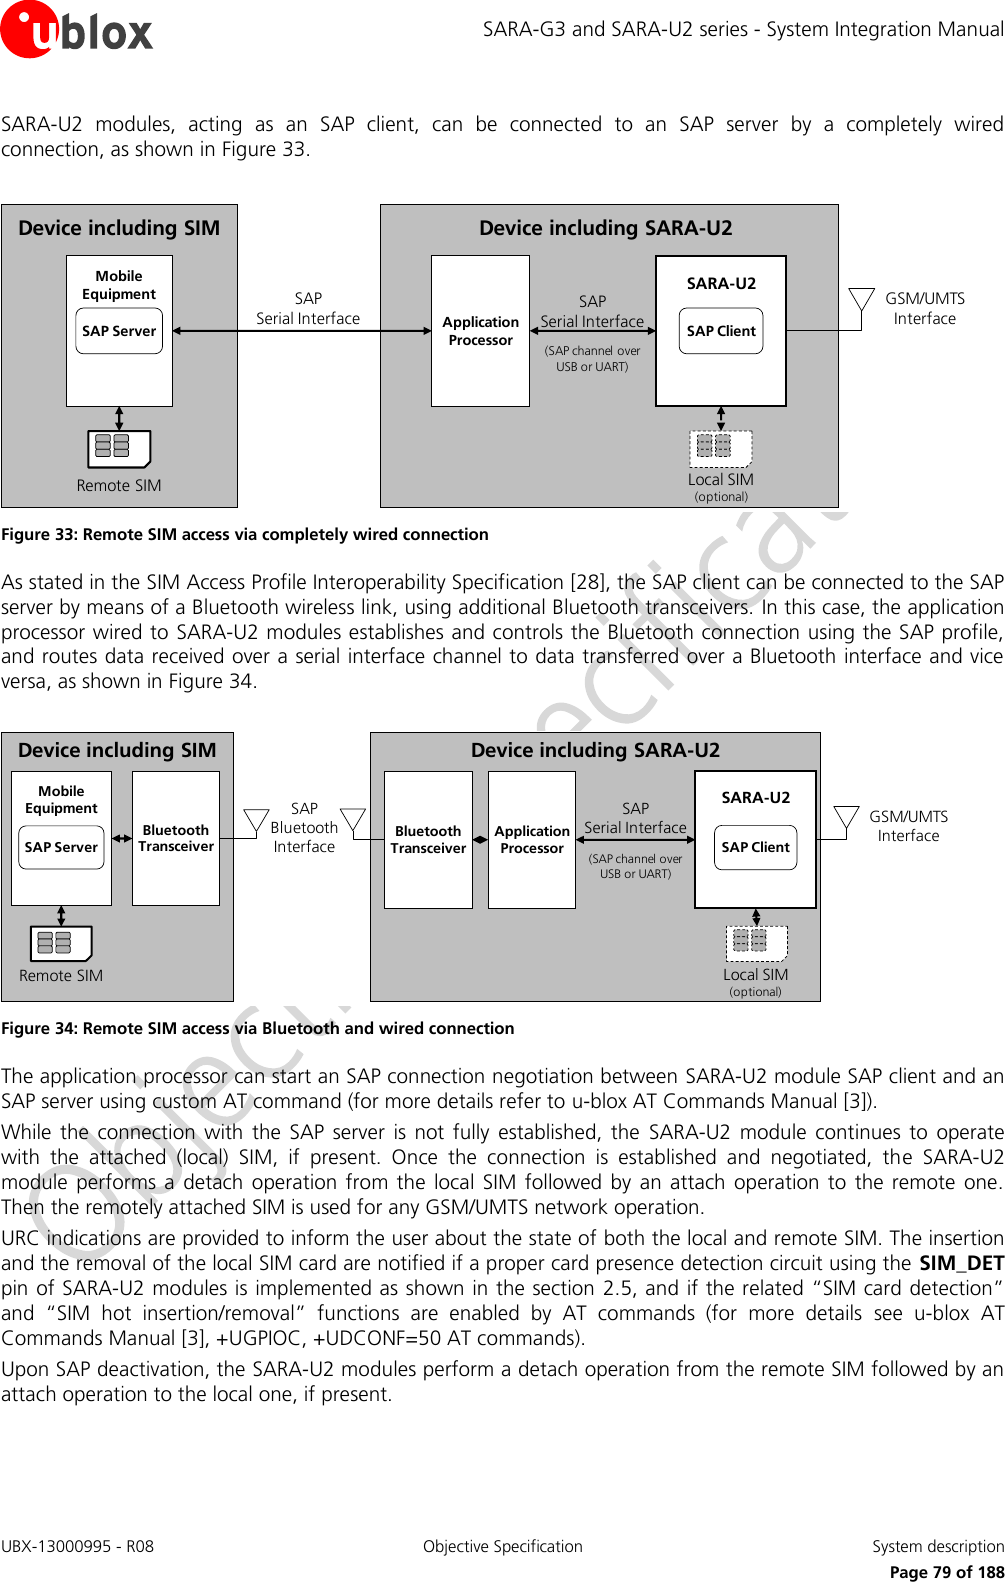 SARA-G3 and SARA-U2 series - System Integration Manual UBX-13000995 - R08  Objective Specification  System description     Page 79 of 188 SARA-U2  modules,  acting  as  an  SAP  client,  can  be  connected  to  an  SAP  server  by  a  completely  wired connection, as shown in Figure 33.  Device including SARA-U2 GSM/UMTS InterfaceSAP             Serial Interface(SAP channel over USB or UART)Local SIM(optional)SARA-U2SAP ClientApplicationProcessorDevice including SIMSAP                   Serial InterfaceRemote SIMMobileEquipmentSAP Server Figure 33: Remote SIM access via completely wired connection As stated in the SIM Access Profile Interoperability Specification [28], the SAP client can be connected to the SAP server by means of a Bluetooth wireless link, using additional Bluetooth transceivers. In this case, the application processor wired to SARA-U2 modules establishes and controls the Bluetooth connection using the SAP profile, and routes data received over a serial interface channel to data transferred over a Bluetooth interface and vice versa, as shown in Figure 34.  Device including SARA-U2SAP              Serial Interface(SAP channel over   USB or UART)GSM/UMTS InterfaceLocal SIM(optional)SARA-U2SAP ClientApplicationProcessorSAP  Bluetooth InterfaceBluetoothTransceiverDevice including SIMRemote SIMMobileEquipmentSAP ServerBluetoothTransceiver Figure 34: Remote SIM access via Bluetooth and wired connection The application processor can start an SAP connection negotiation between SARA-U2 module SAP client and an SAP server using custom AT command (for more details refer to u-blox AT Commands Manual [3]). While  the  connection  with  the  SAP  server  is  not  fully  established,  the  SARA-U2  module  continues  to  operate with  the  attached  (local)  SIM,  if  present.  Once  the  connection  is  established  and  negotiated,  the  SARA-U2 module  performs  a  detach  operation from  the  local SIM followed  by an attach  operation to  the remote  one. Then the remotely attached SIM is used for any GSM/UMTS network operation. URC indications are provided to inform the user about the state of both the local and remote SIM. The insertion and the removal of the local SIM card are notified if a proper card presence detection circuit using the SIM_DET pin of SARA-U2 modules is implemented as shown in the section 2.5, and if the related “SIM card detection” and  “SIM  hot  insertion/removal”  functions  are  enabled  by  AT  commands  (for  more  details  see  u-blox  AT Commands Manual [3], +UGPIOC, +UDCONF=50 AT commands). Upon SAP deactivation, the SARA-U2 modules perform a detach operation from the remote SIM followed by an attach operation to the local one, if present.  